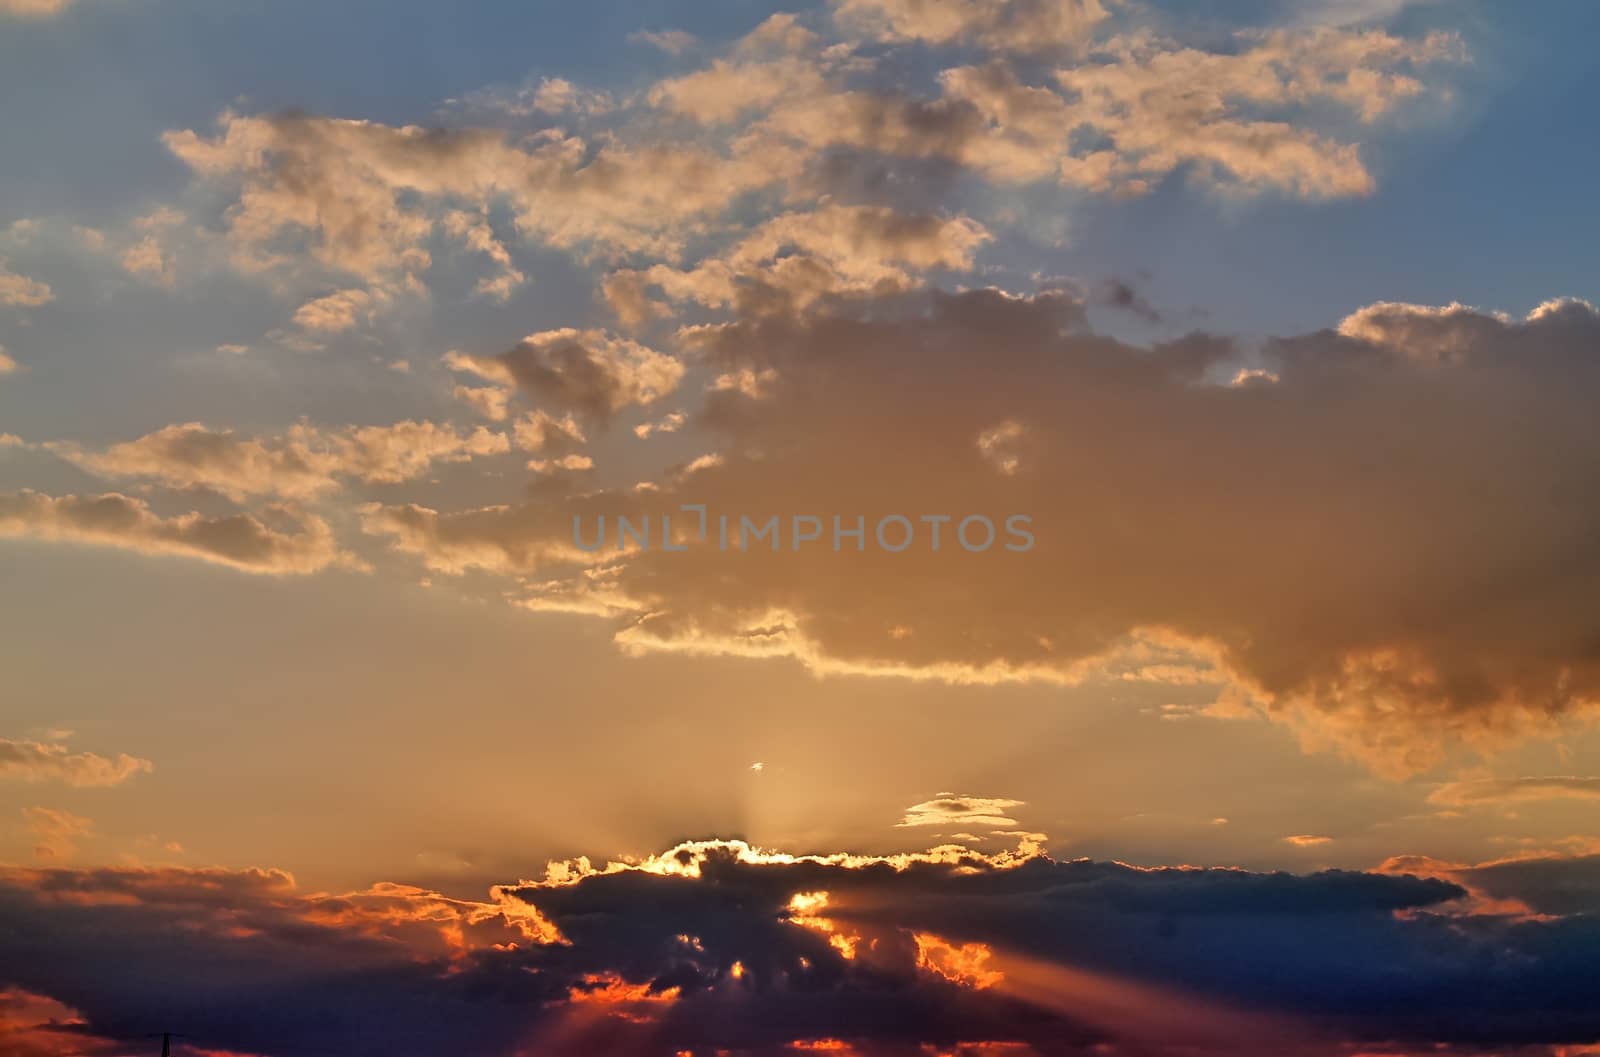 Beautiful view at sunbeams with some lens flares and clouds in a by MP_foto71